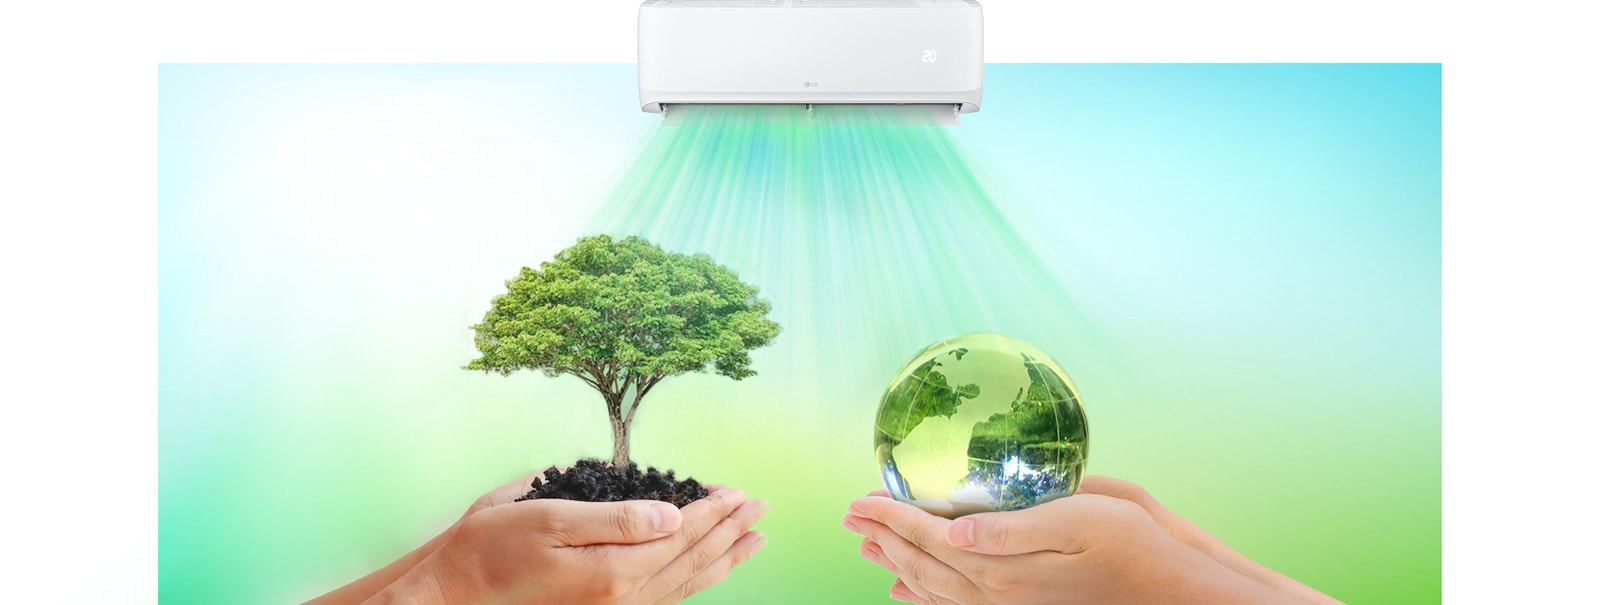 The air conditioner is operating with Eco-Friendly R32 Refrigerant.